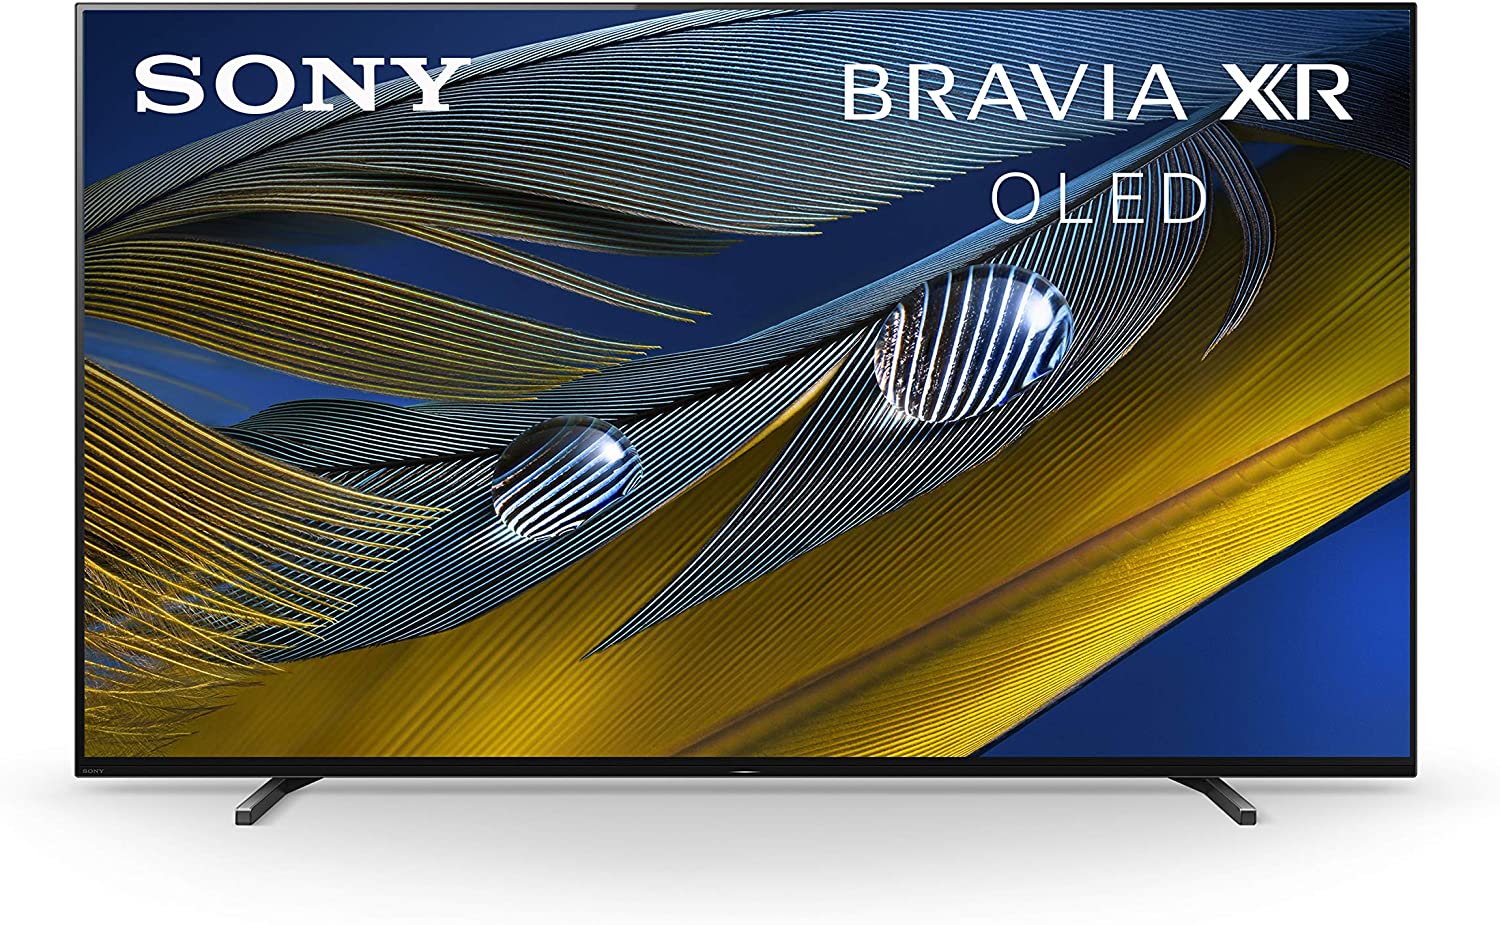 Sony A80J 55 Inch TV: BRAVIA XR OLED 4K Ultra HD Smart Google TV with Dolby Vision HDR and Alexa Compatibility XR55A80J-2021 Model